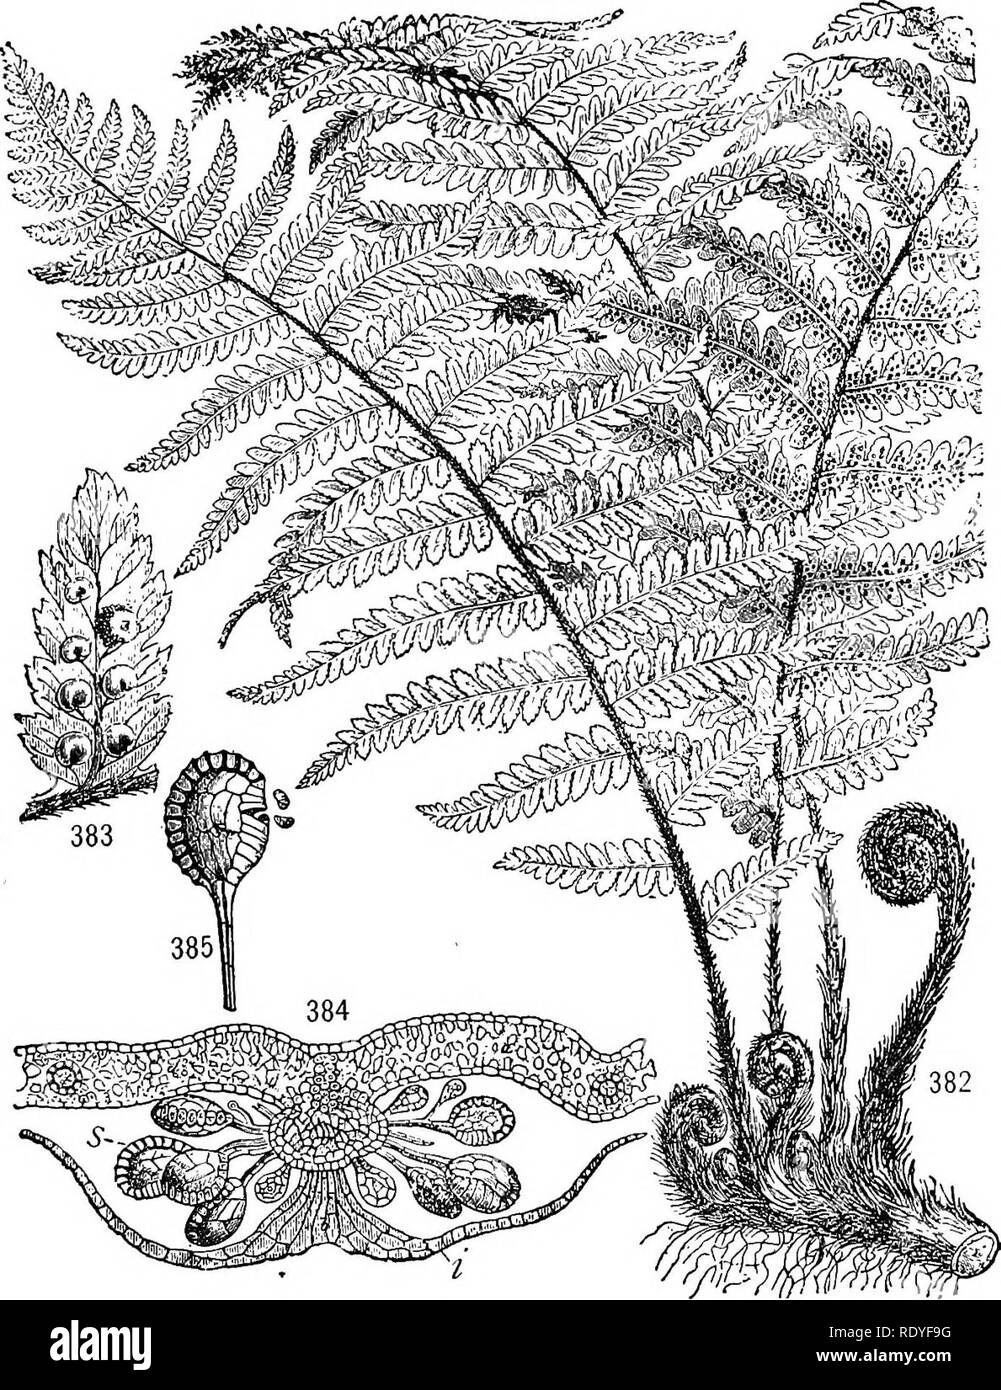 . A textbook of botany for colleges and universities ... Botany. PTERIDOPHYTES 163. Figs. 382-385. — Aspidium: 382, general habit, showing leaves and circinate verna- tion, dorsiventral (subterranean) stem, and secondary roots; 383, a single pinnule, showing dichotomous veins and sori with shieldlike indusia; 384, section through a sorus, showing the indusium and long-stalked sporangia; 385, a single sporangium, showing the incomplete vertical annulus and the transverse dehiscence. — After WOSSIDLO.. Please note that these images are extracted from scanned page images that may have been digita Stock Photo